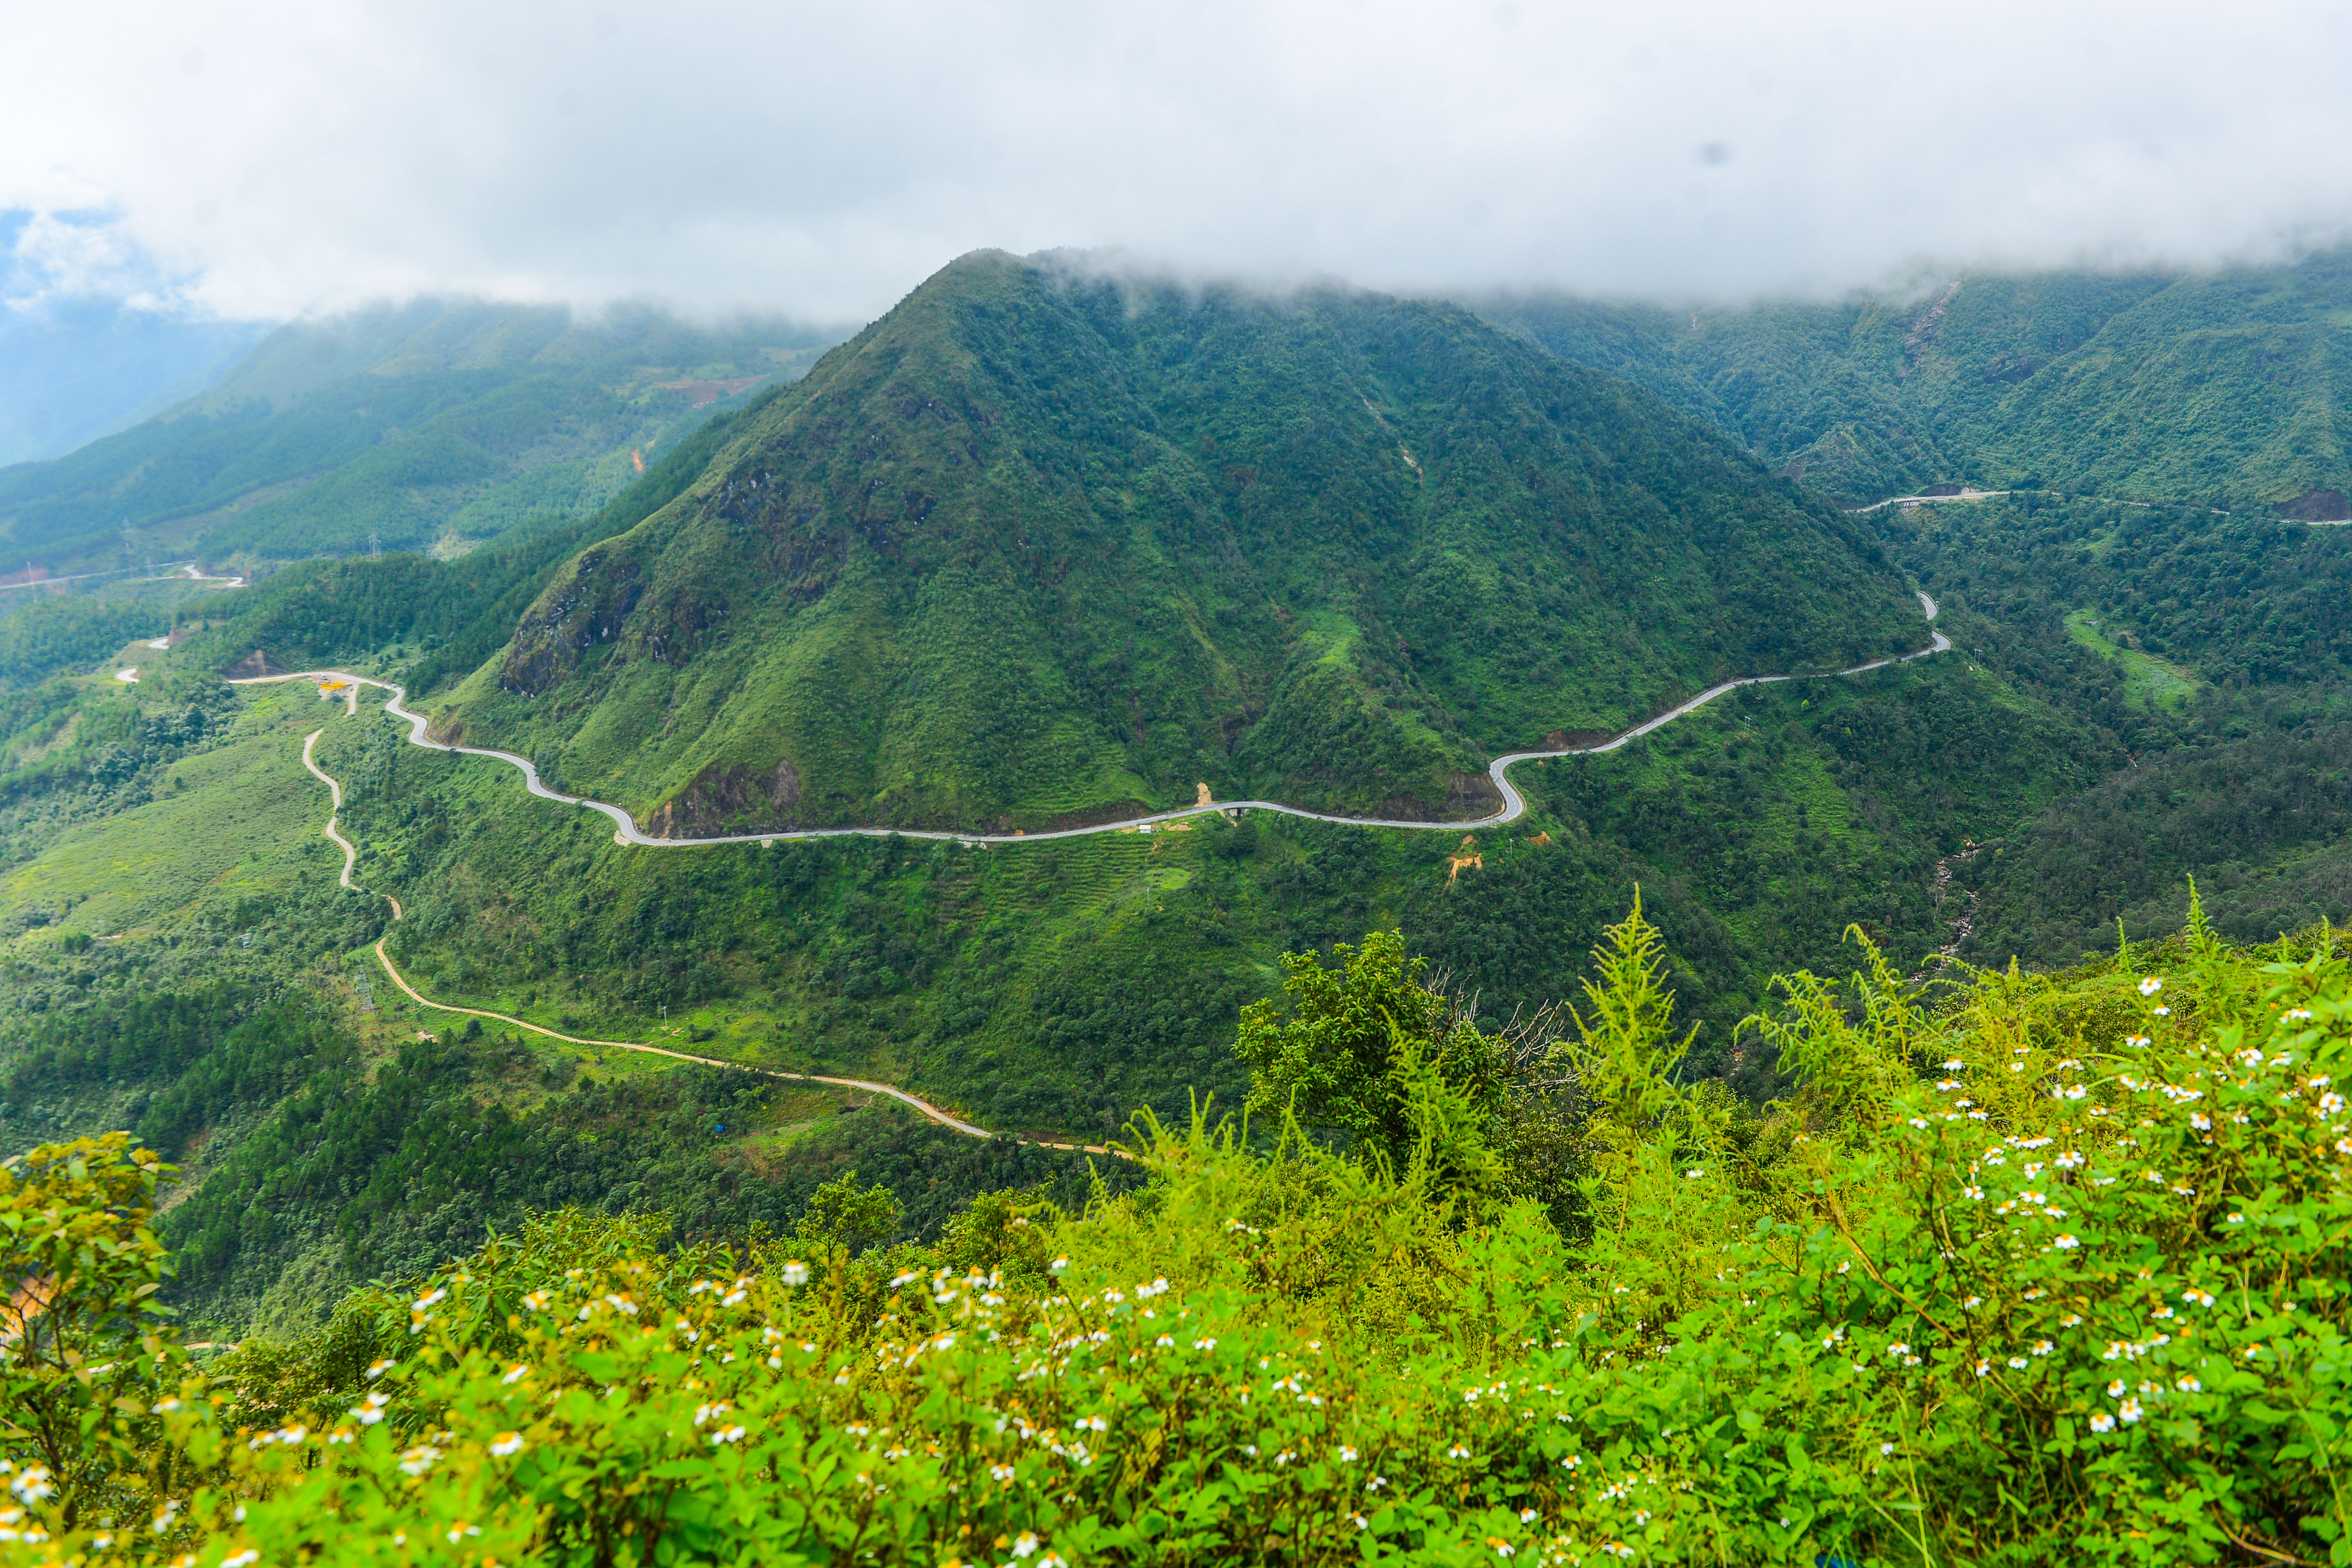 Have you ever heard of the Four Great Passes of Vietnam?